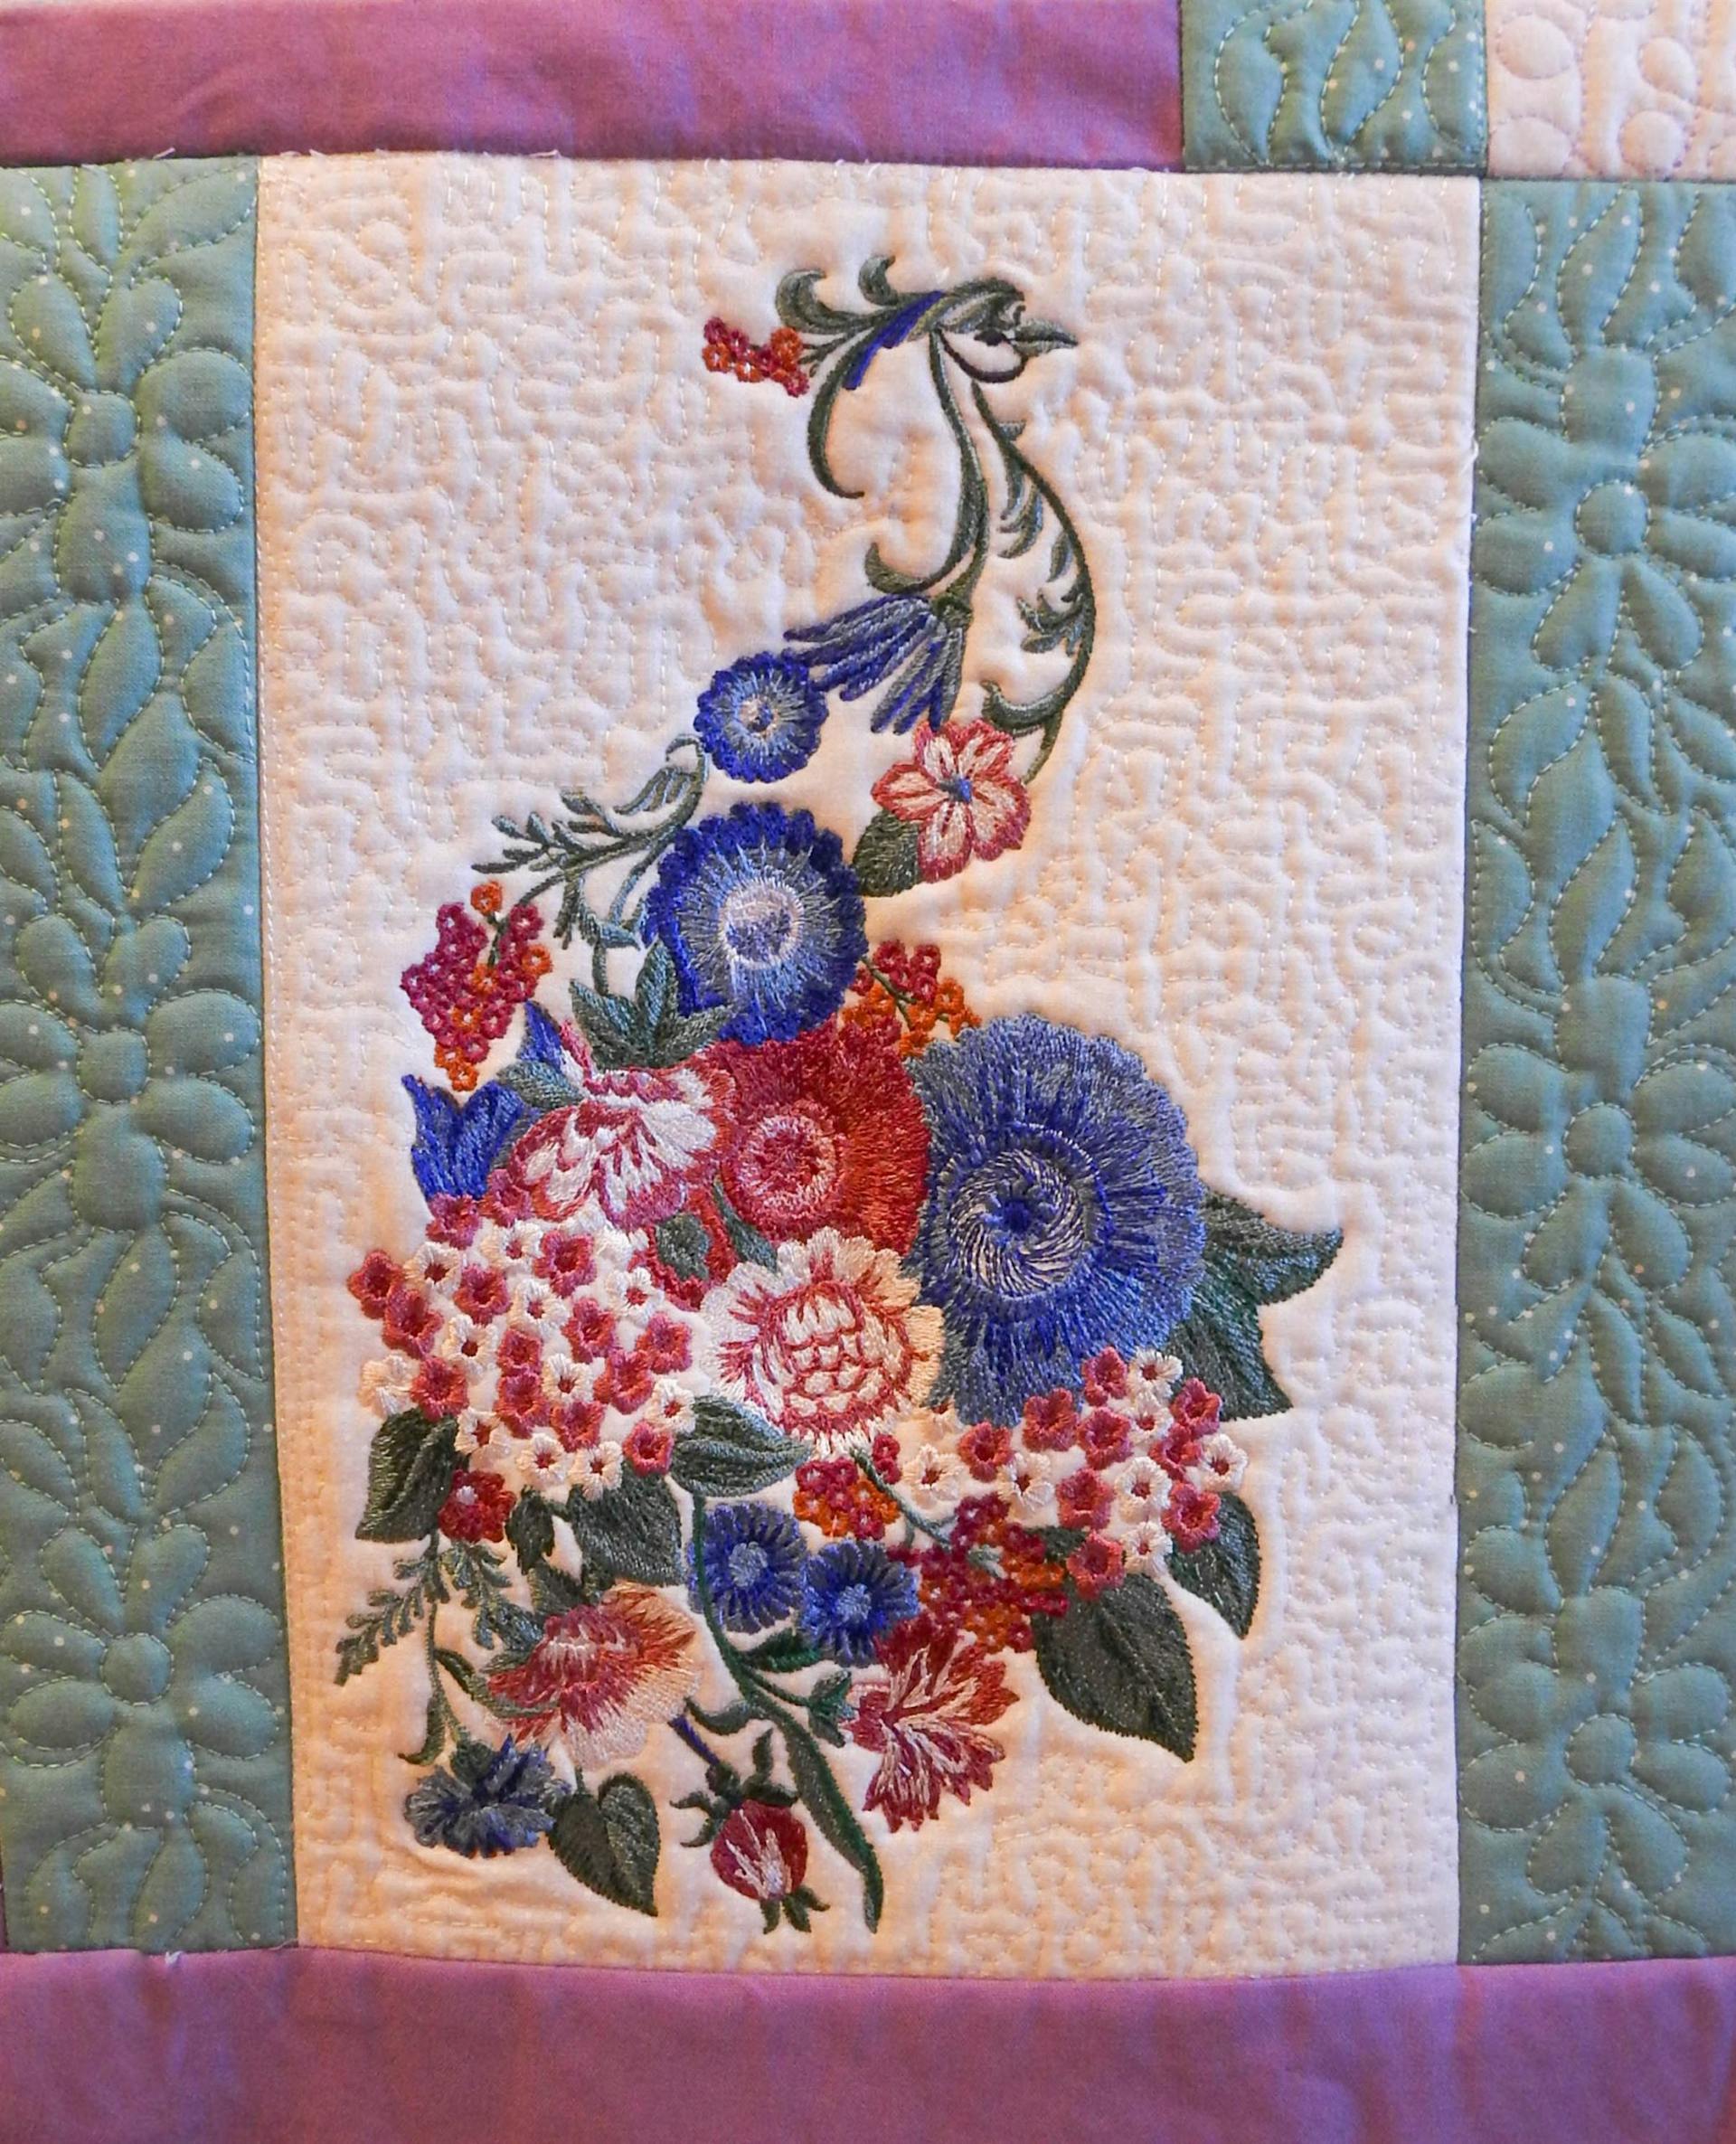 Floral peacock with stippling added to quilt block